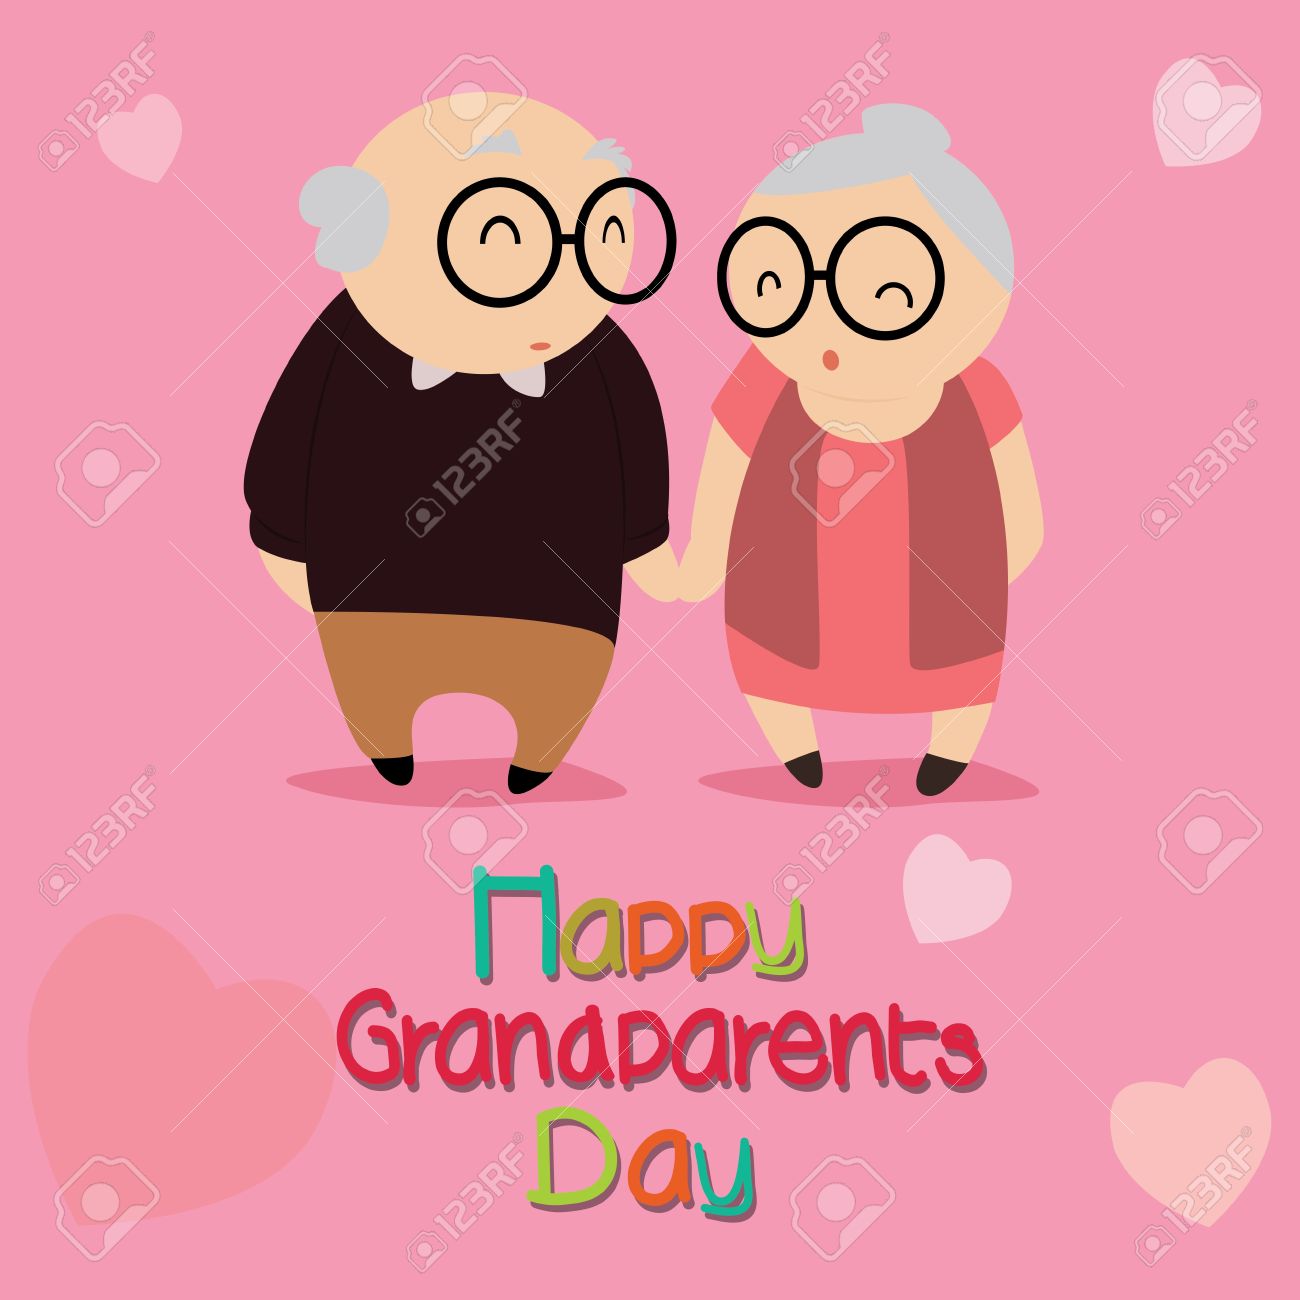 Happy Grandparents Day Beautiful Greeting Card